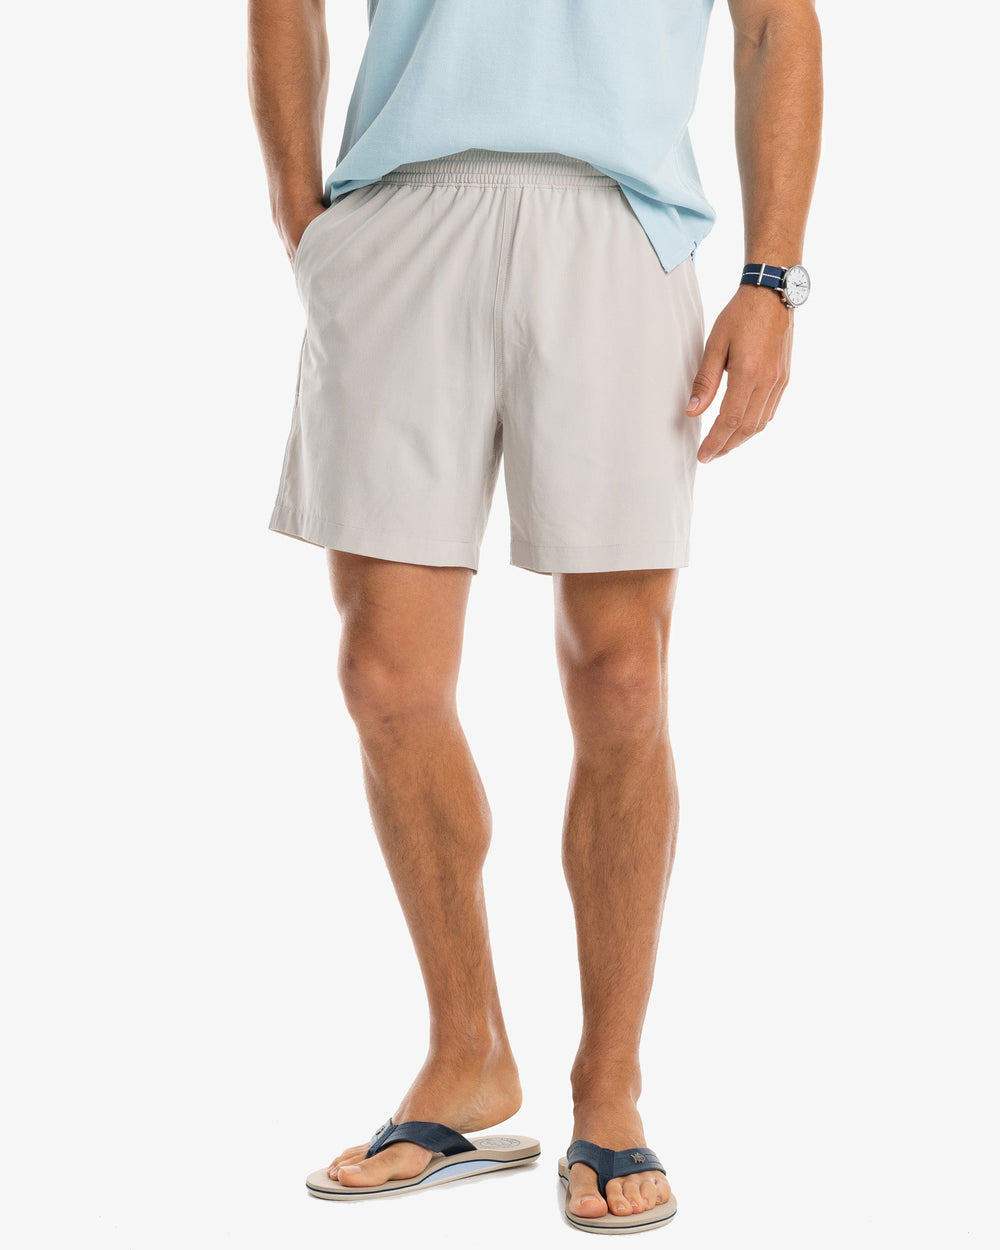 The model front view of the Men's Rip Channel 6 Inch Performance Short by Southern Tide - Marble Grey